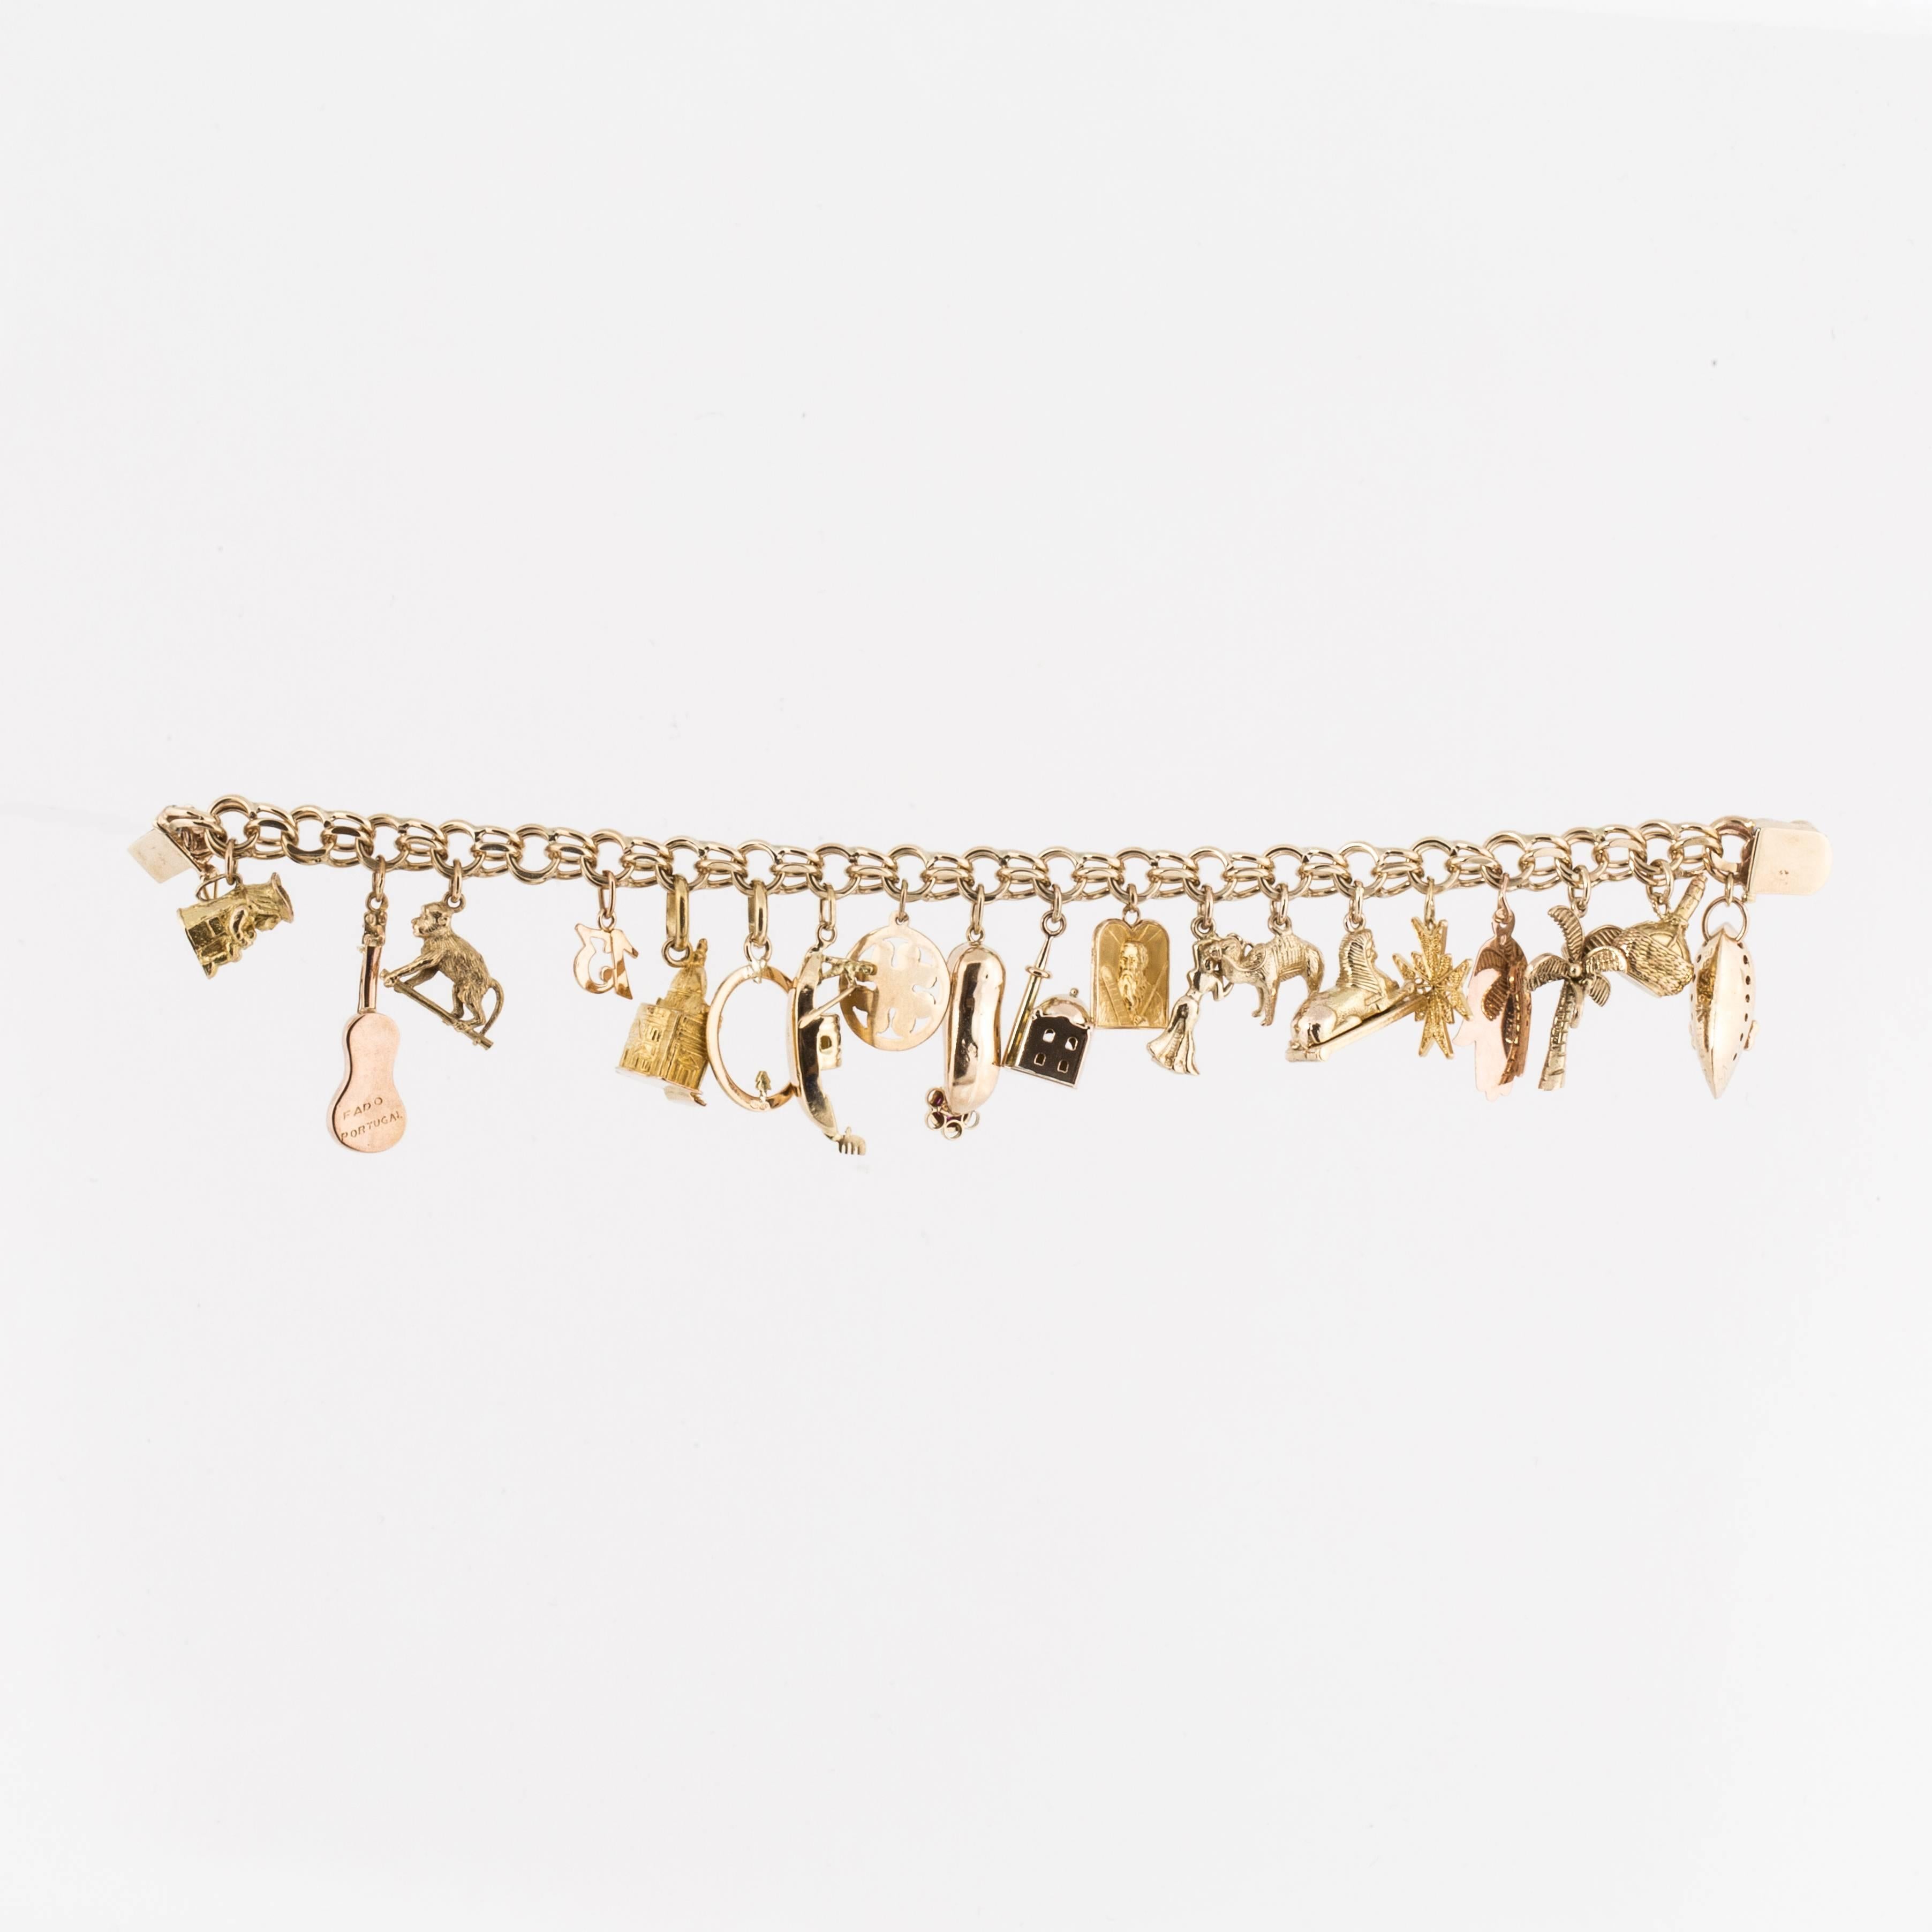 This link bracelet in 14K yellow gold is holding nineteen (19) charms.  The charms are a mixture of 18K, 14K and 9K gold.  Theme seems to be Middle Eastern and European.